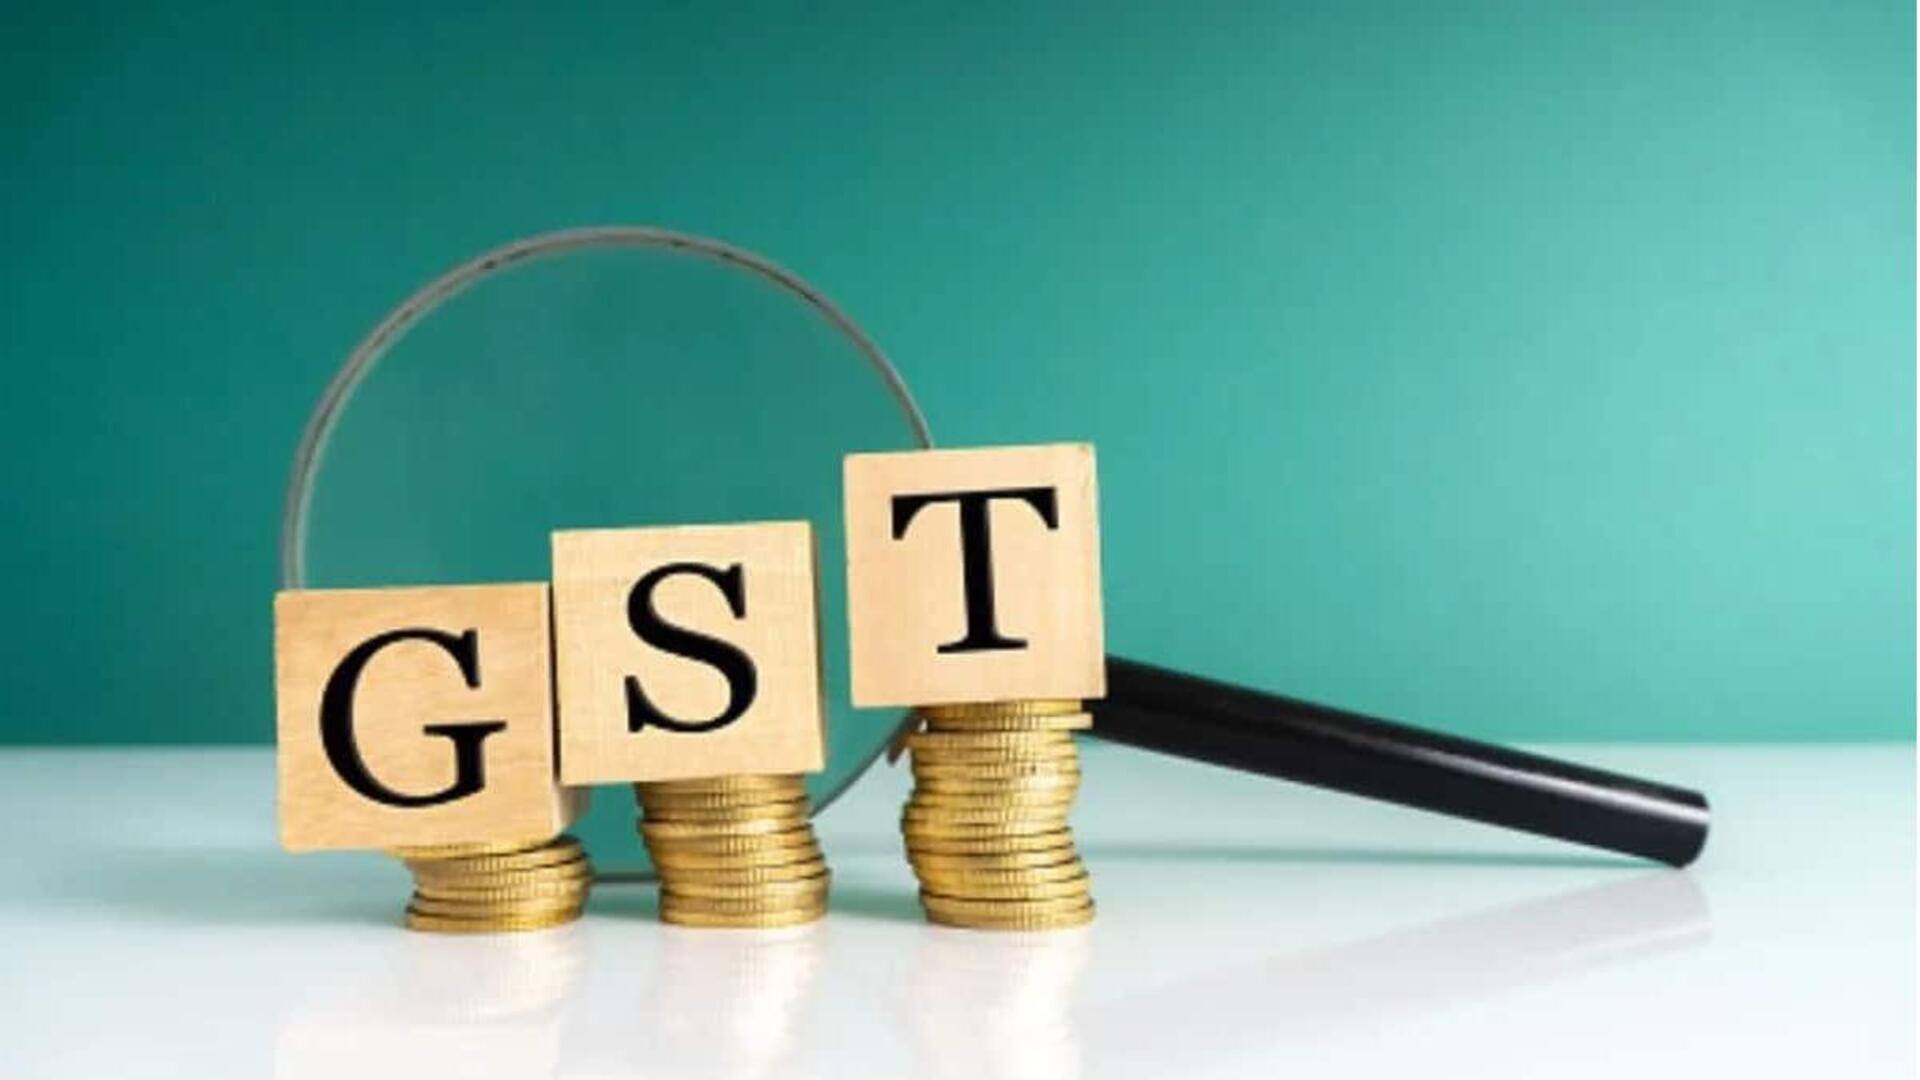 August GST revenues soar 11% YoY to Rs. 1.6L crore